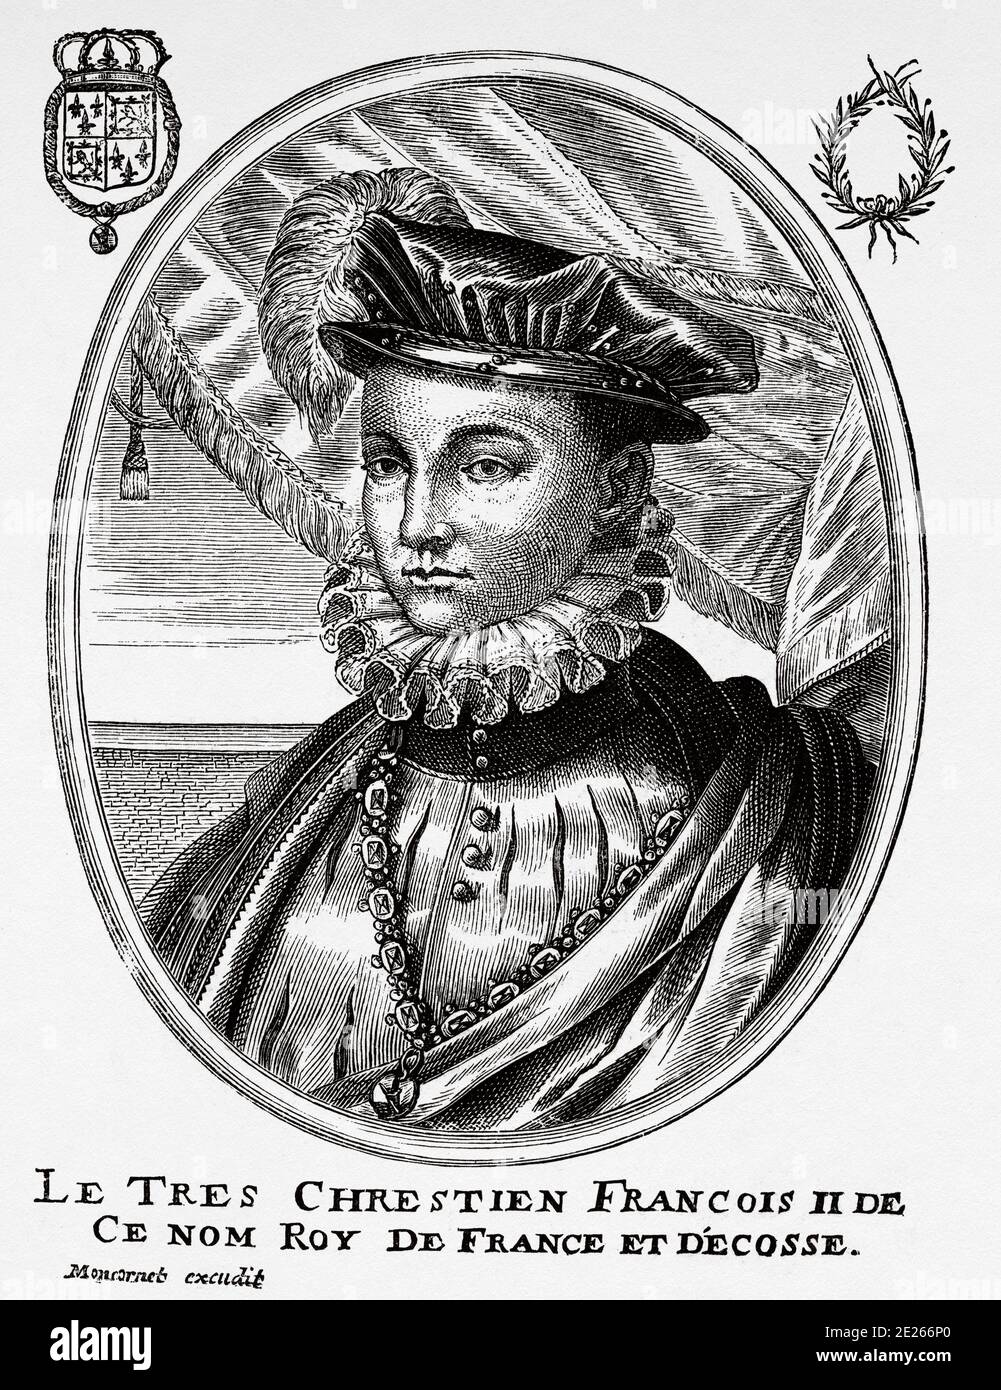 Portrait of Francis II of France (Fontainebleau, January 19, 1544 - Orleans, December 5, 1560), King of France from 1559 to 1560. Son of Henry II of France and Catherine de Medici. History of Philip II of Spain. Old engraving published in Historia de Felipe II by H. Forneron, in 1884 Stock Photo